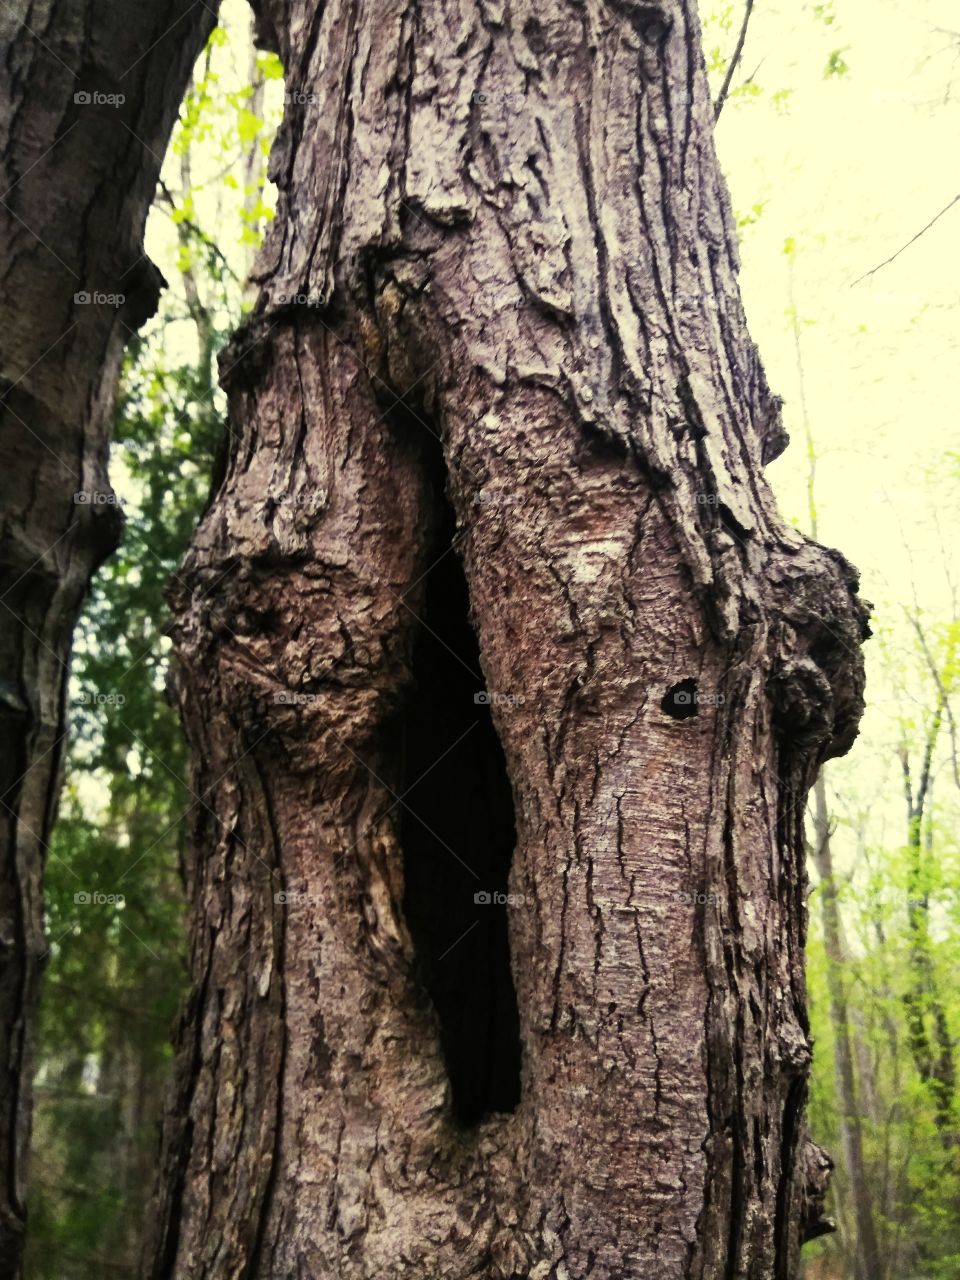 Very interesting hole in a tree.